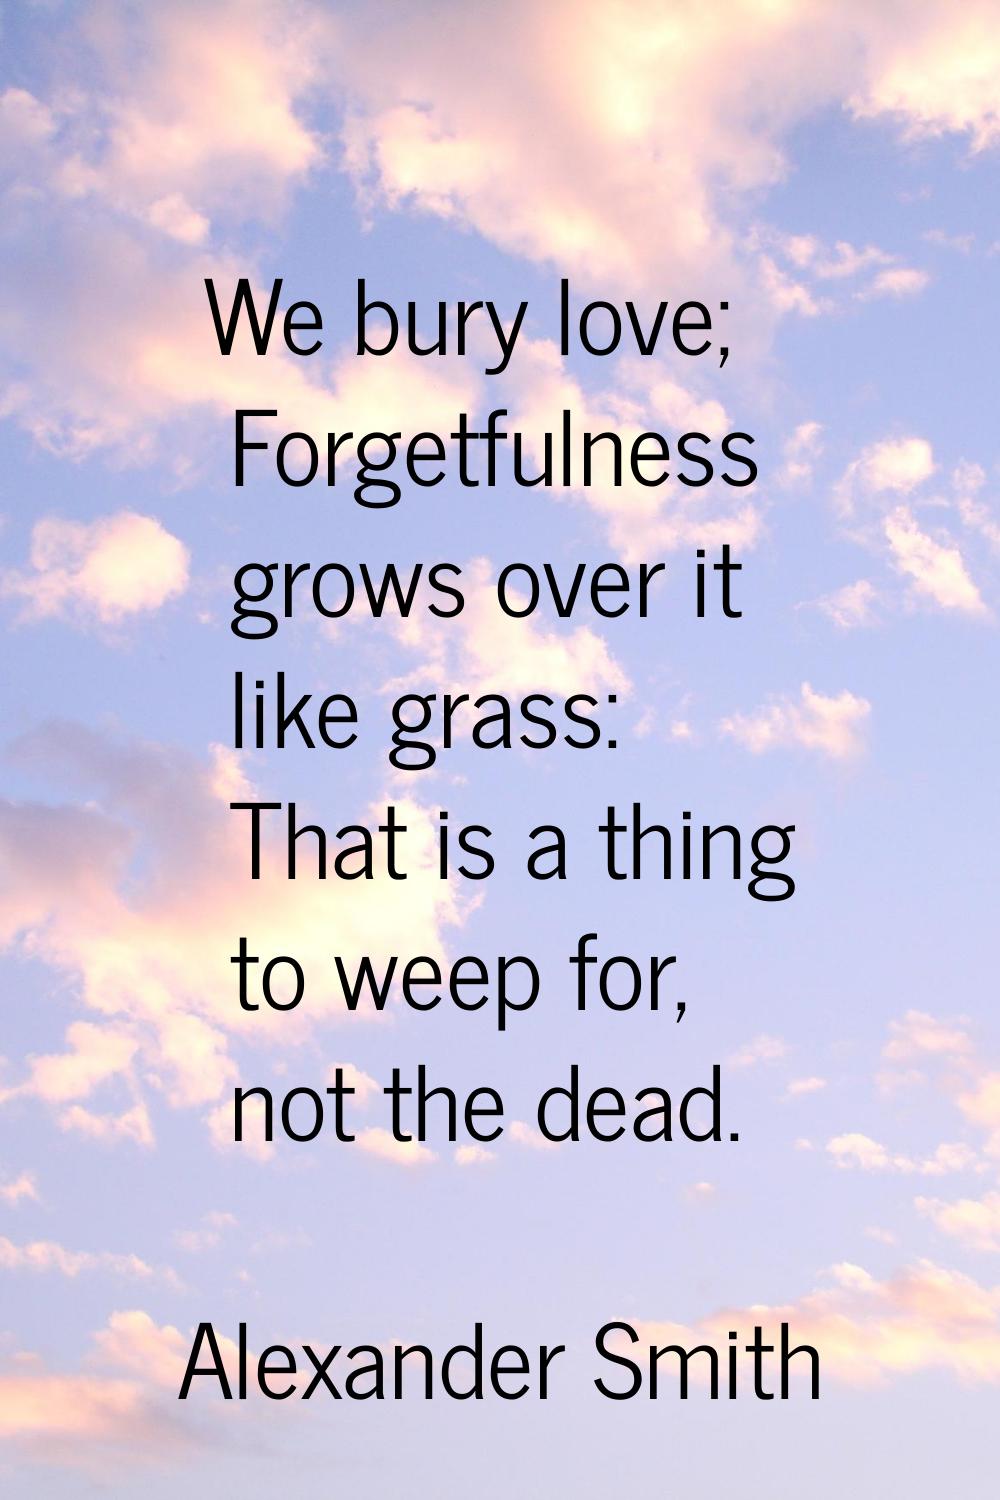 We bury love; Forgetfulness grows over it like grass: That is a thing to weep for, not the dead.